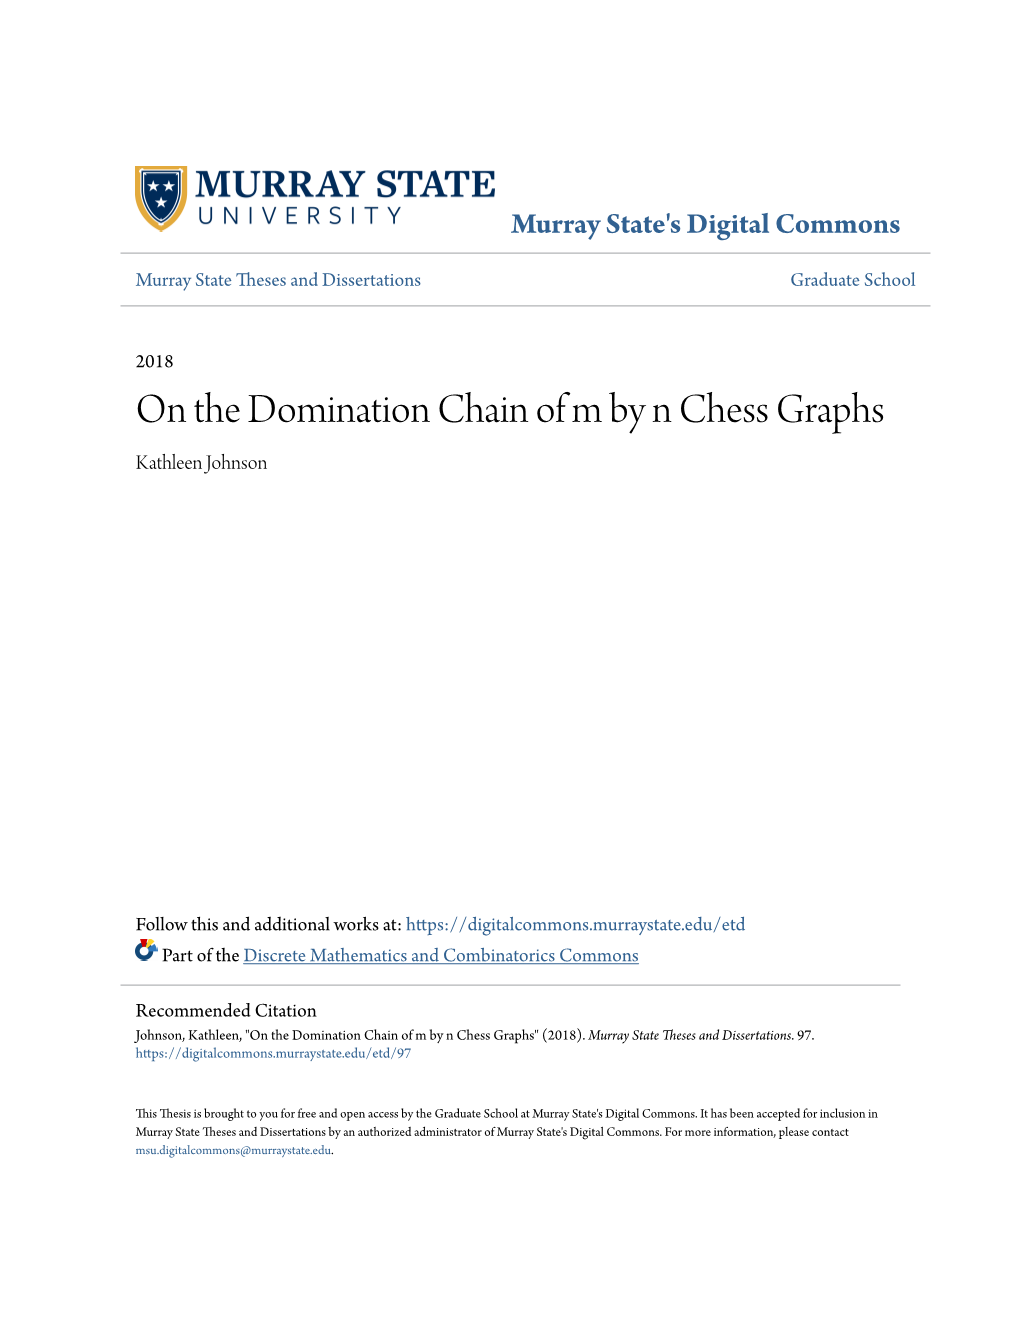 On the Domination Chain of M by N Chess Graphs Kathleen Johnson